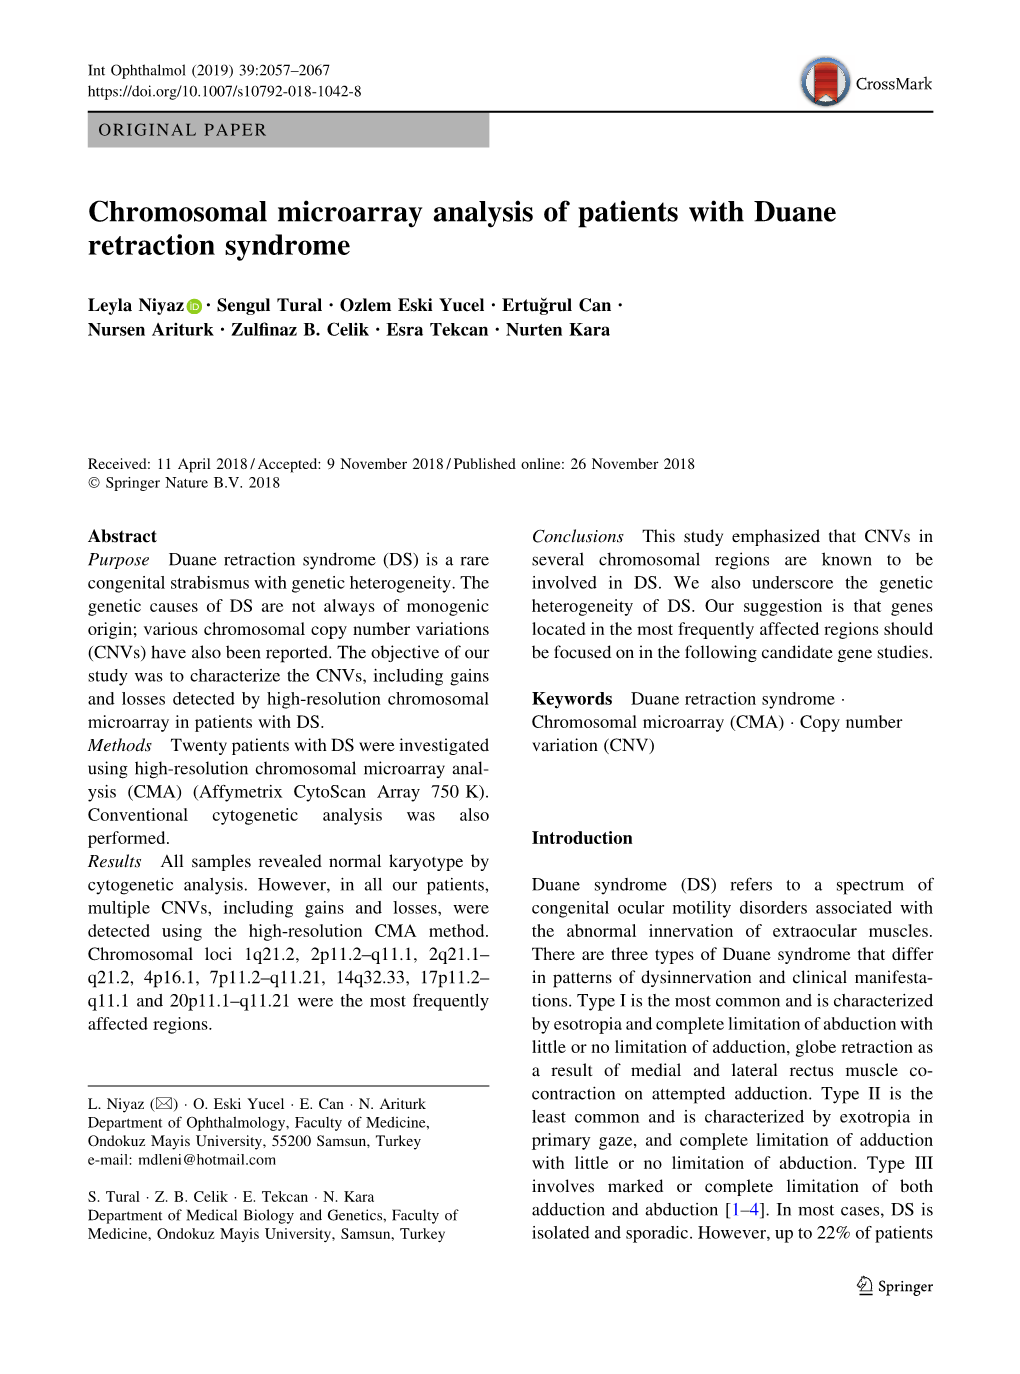 Chromosomal Microarray Analysis of Patients with Duane Retraction Syndrome